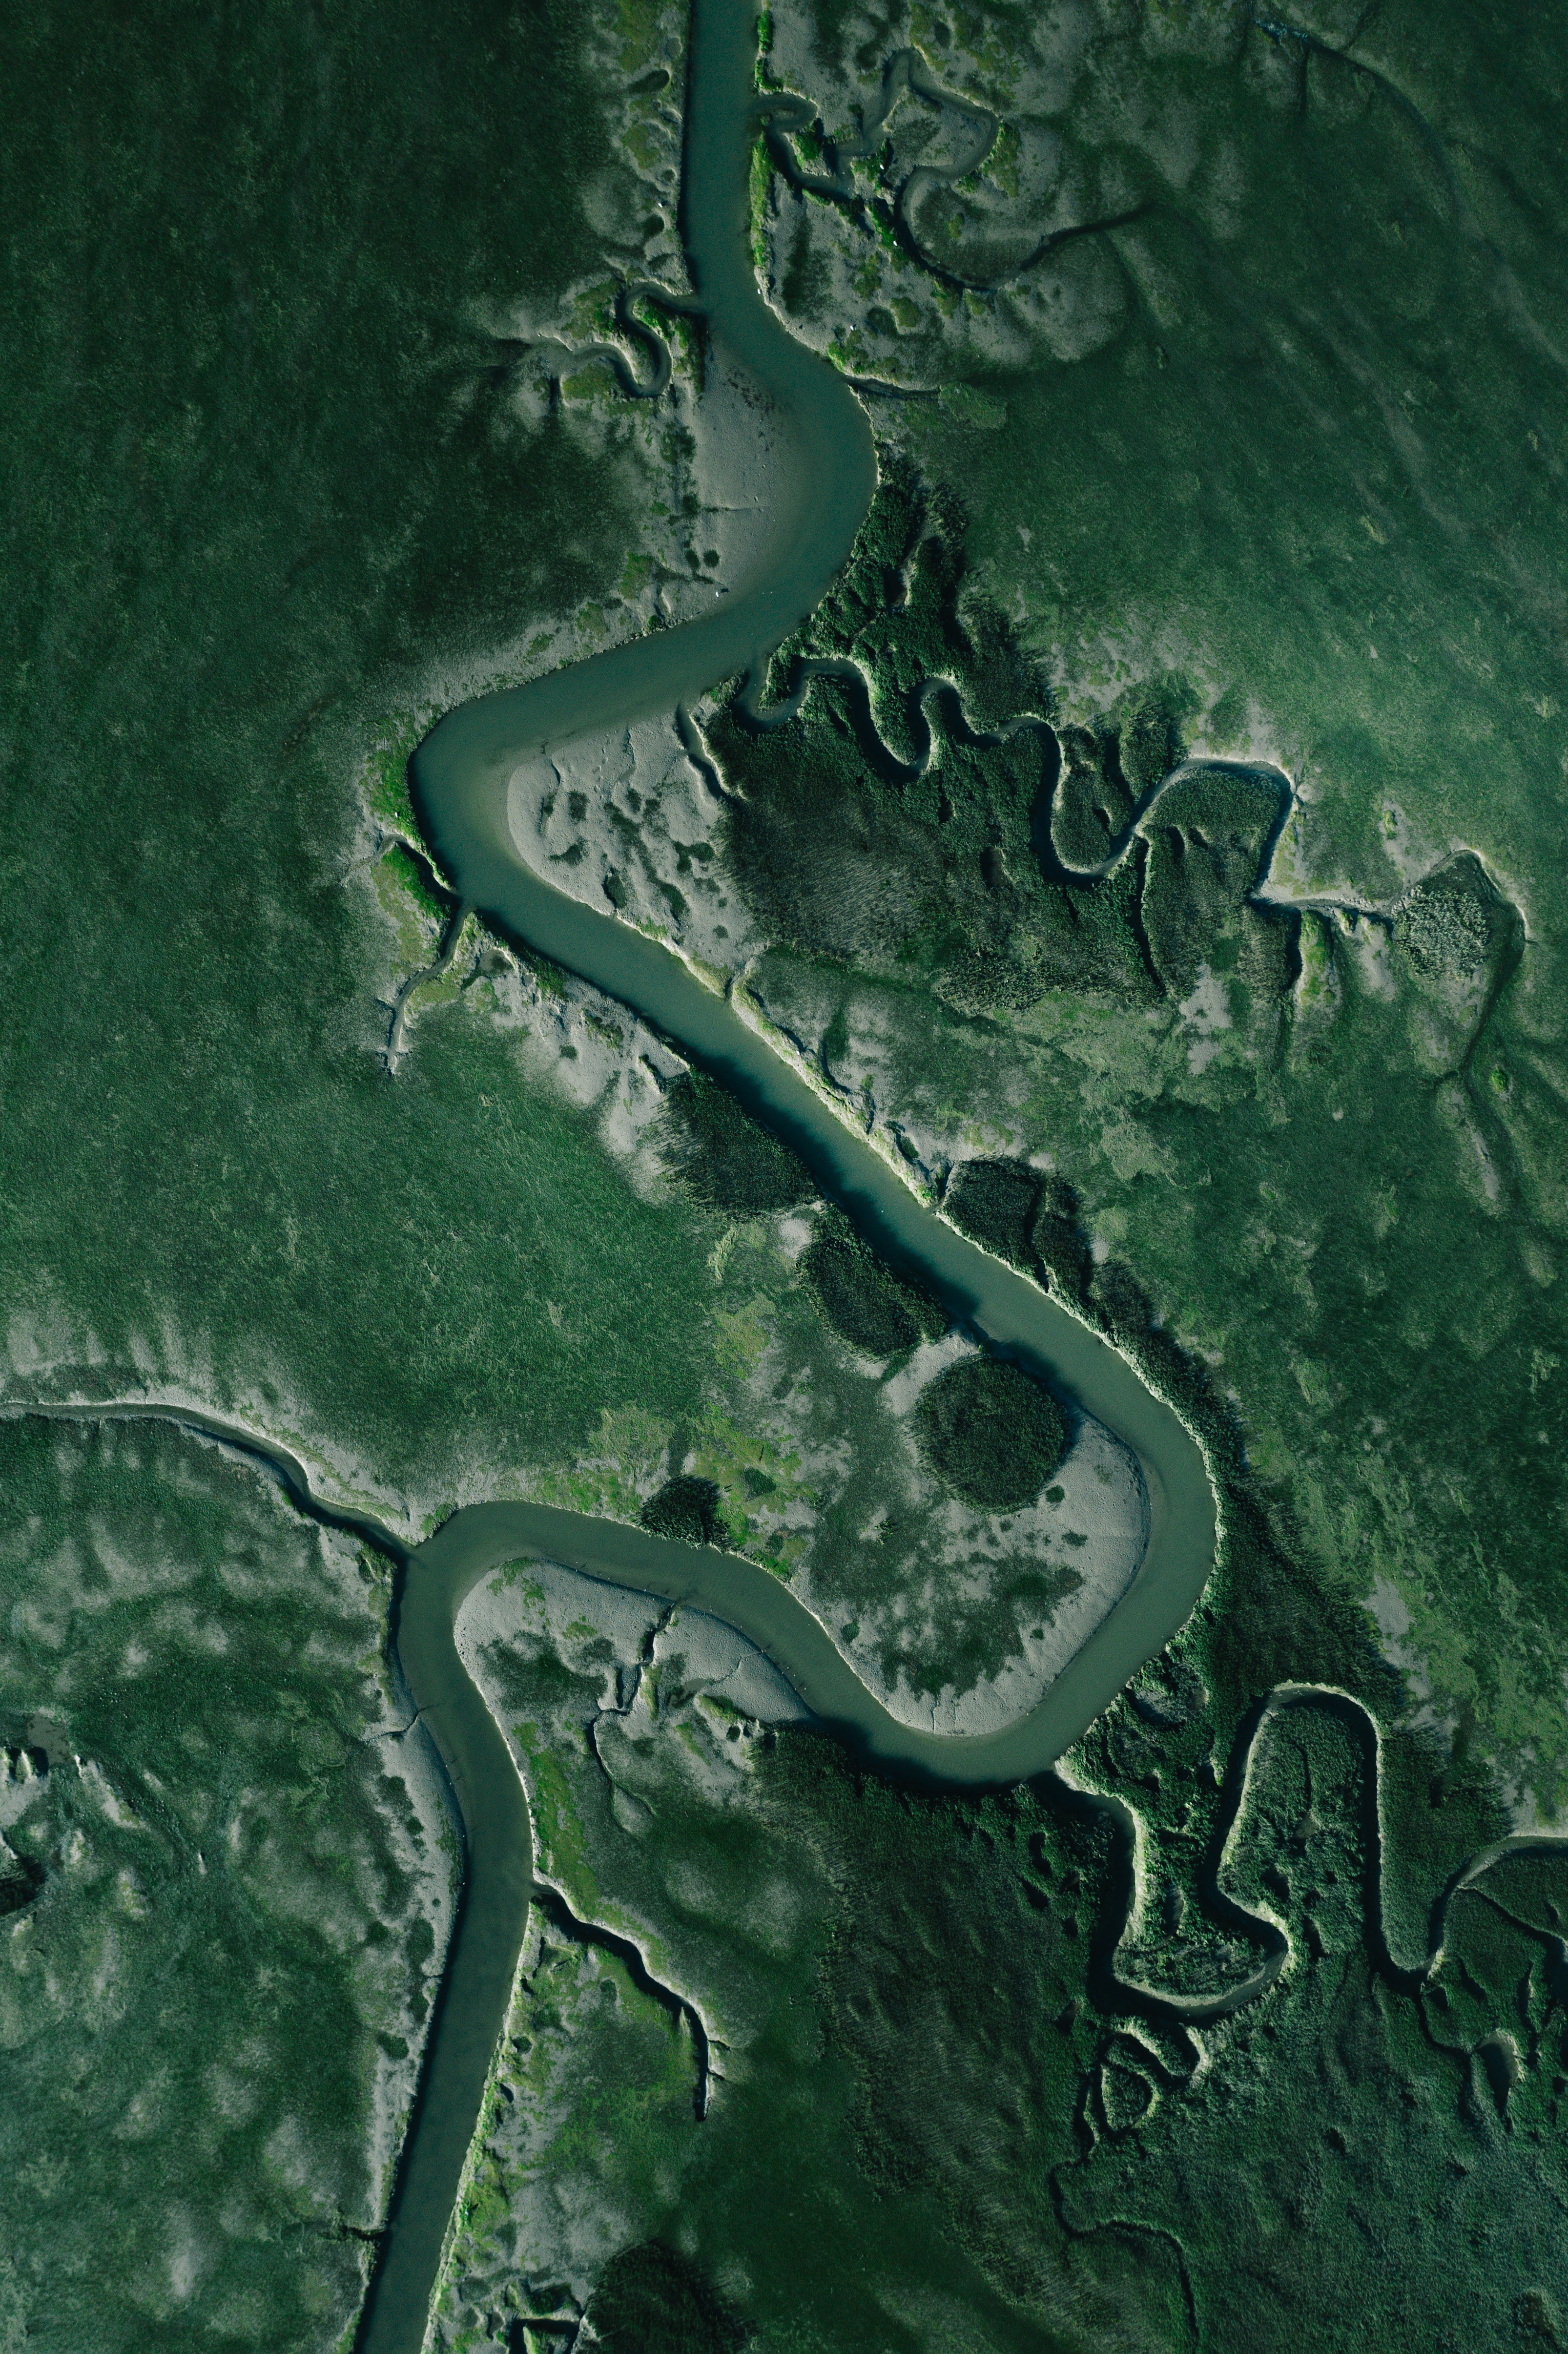 view from above, nature, rivers, grass, winding, sinuous